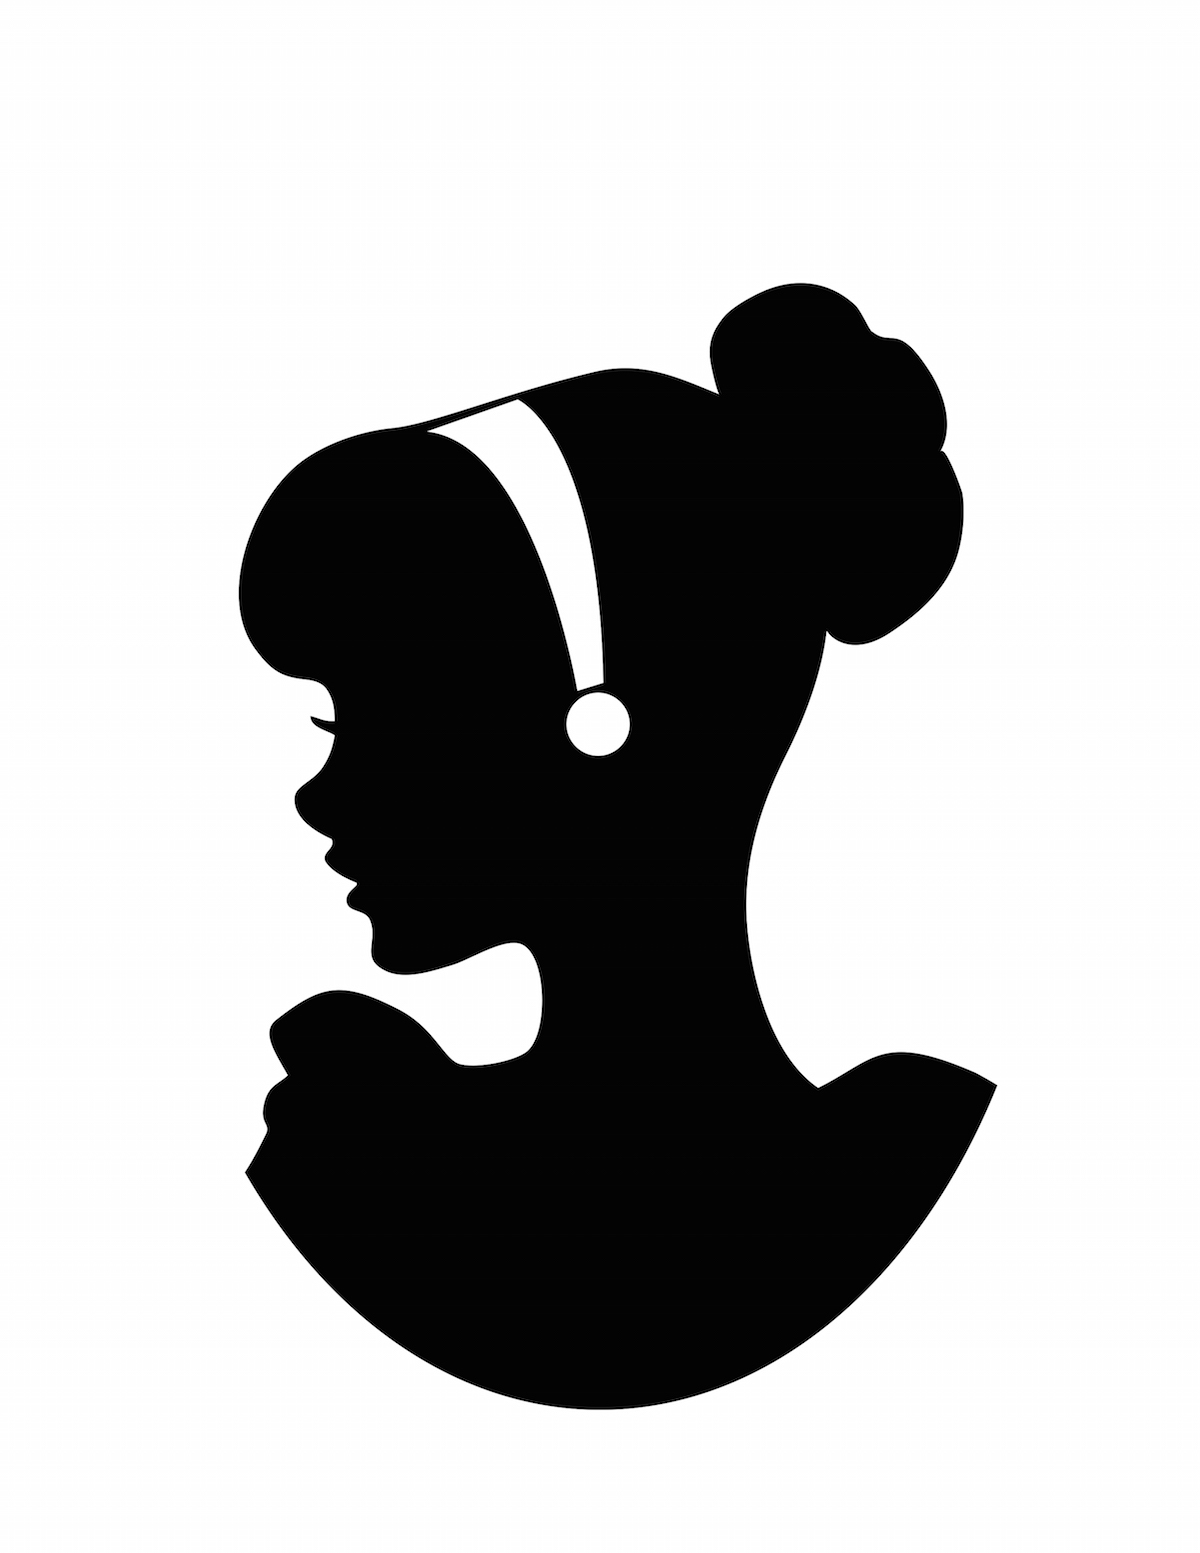 Cinderella Silhouette PNG HD - 125721